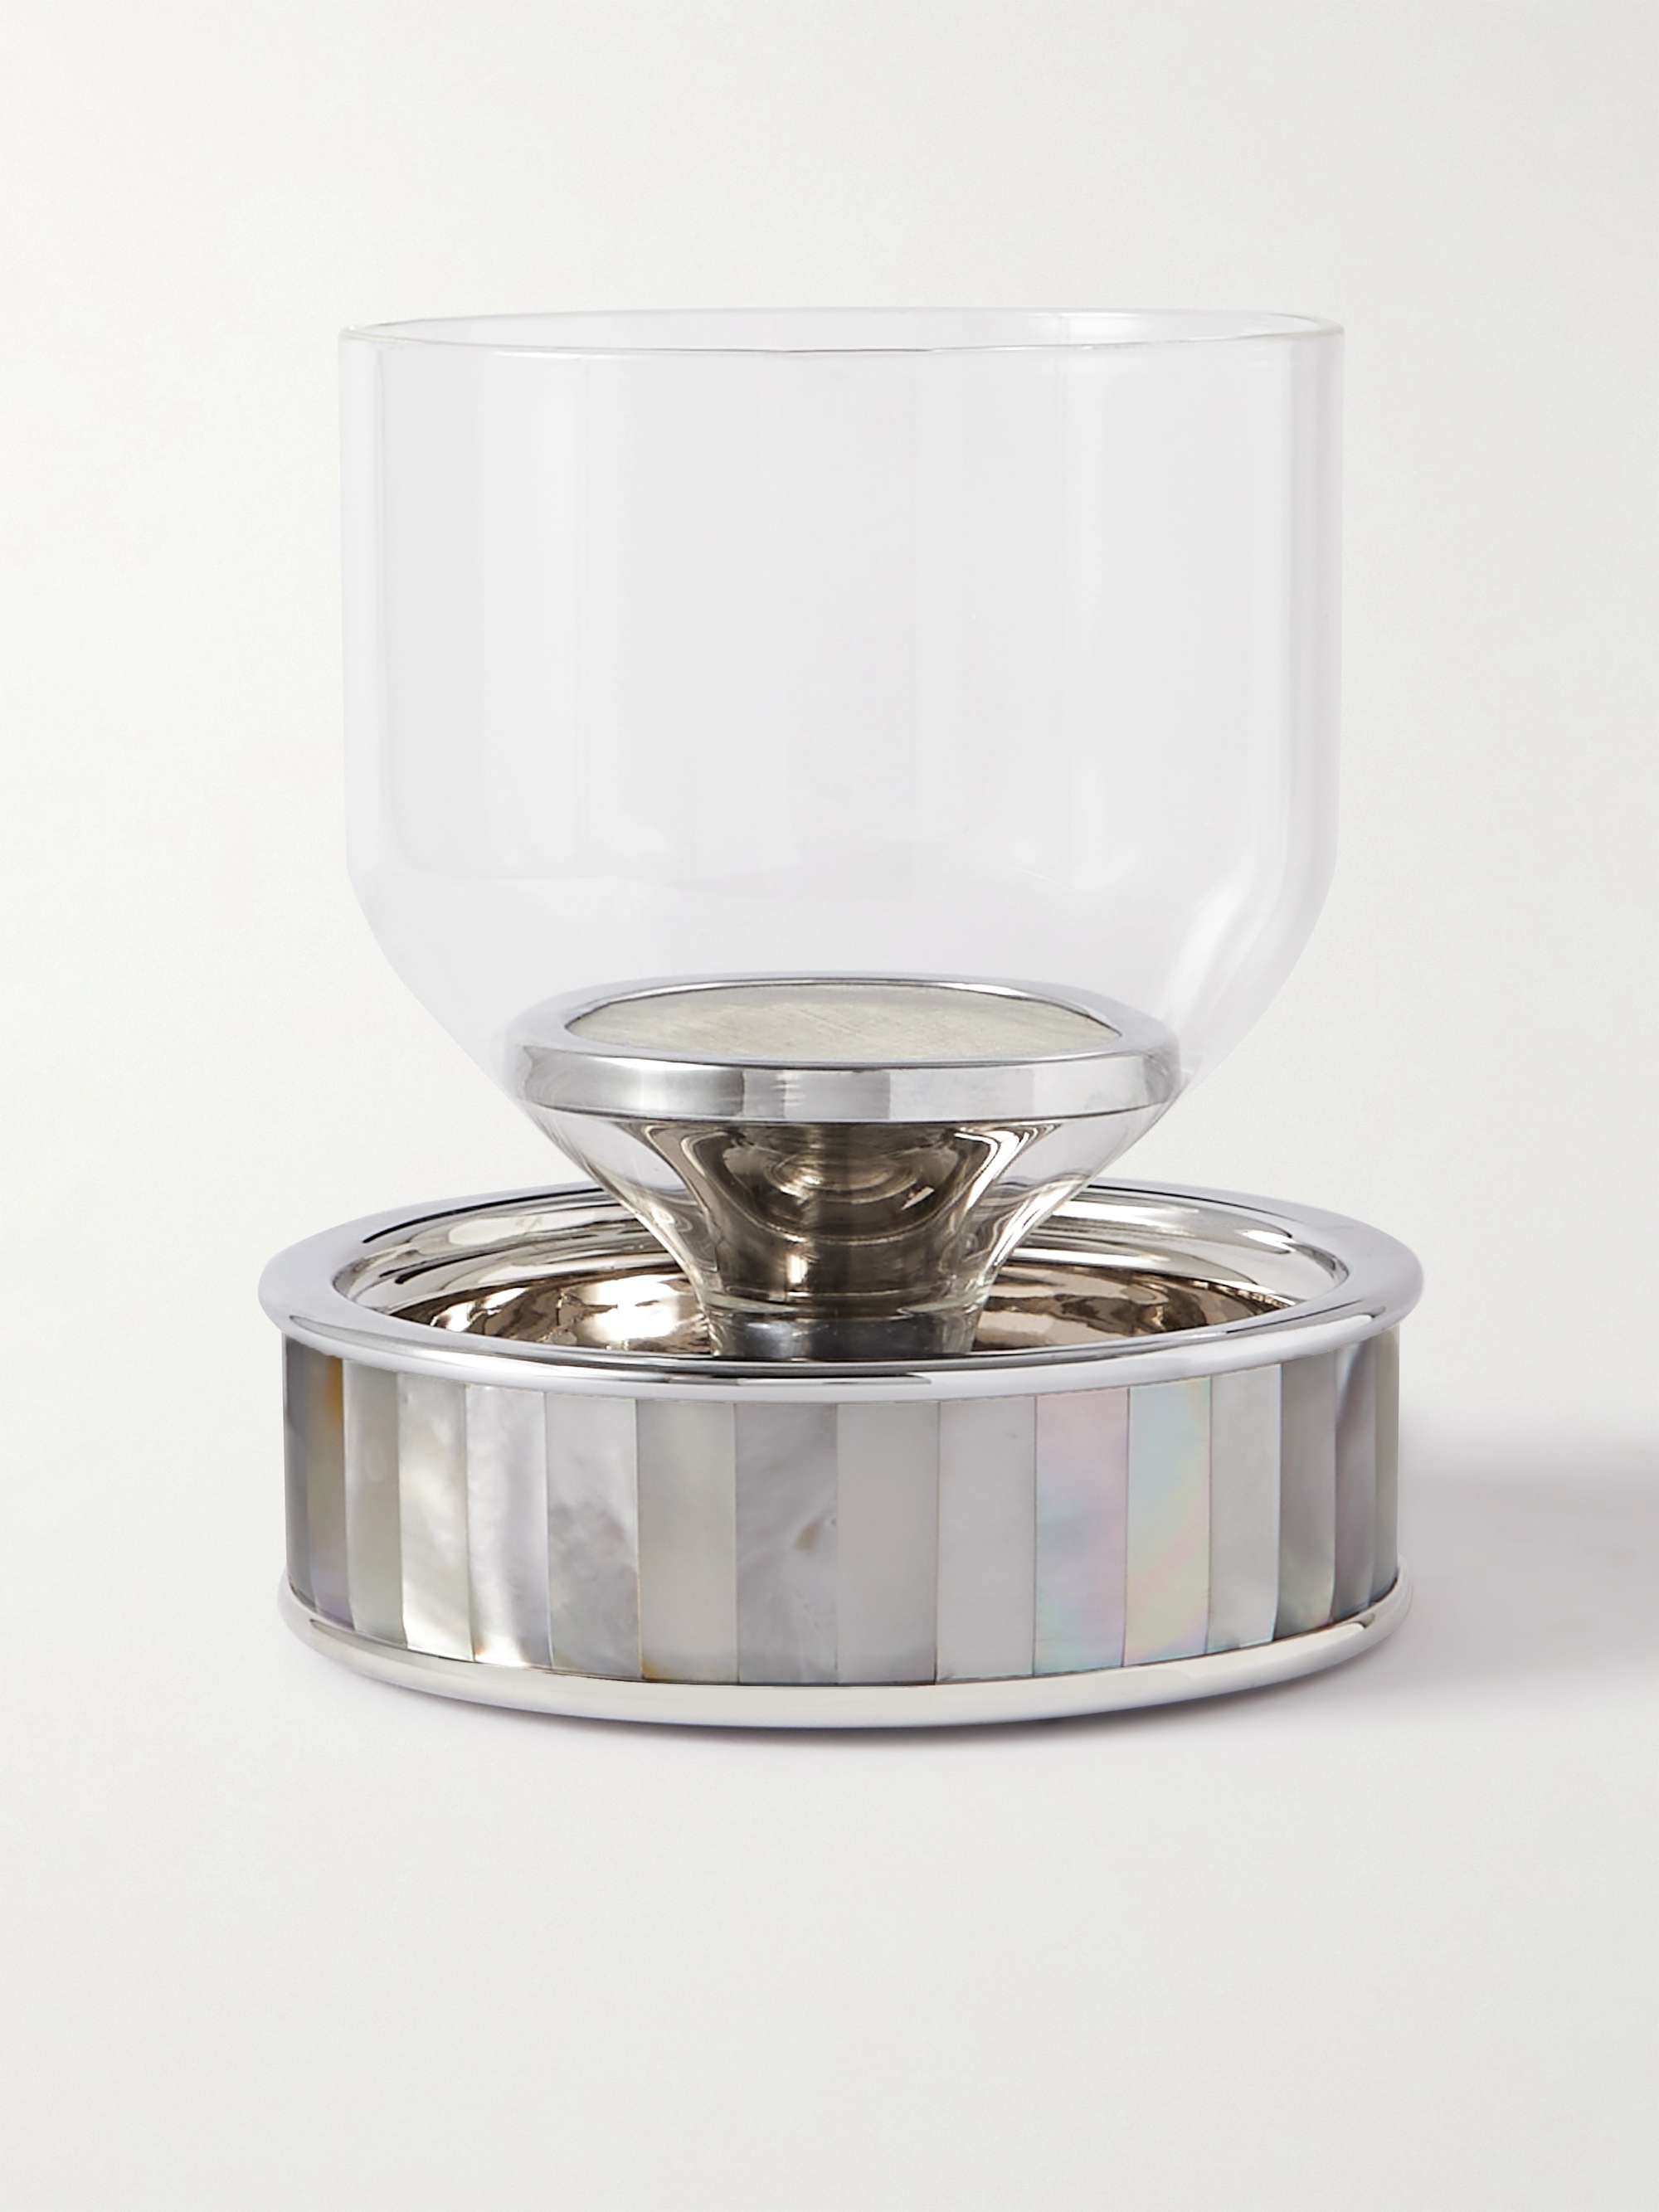 LORENZI MILANO Stainless Steel, Mother-of-Pearl and Glass Wine Filter